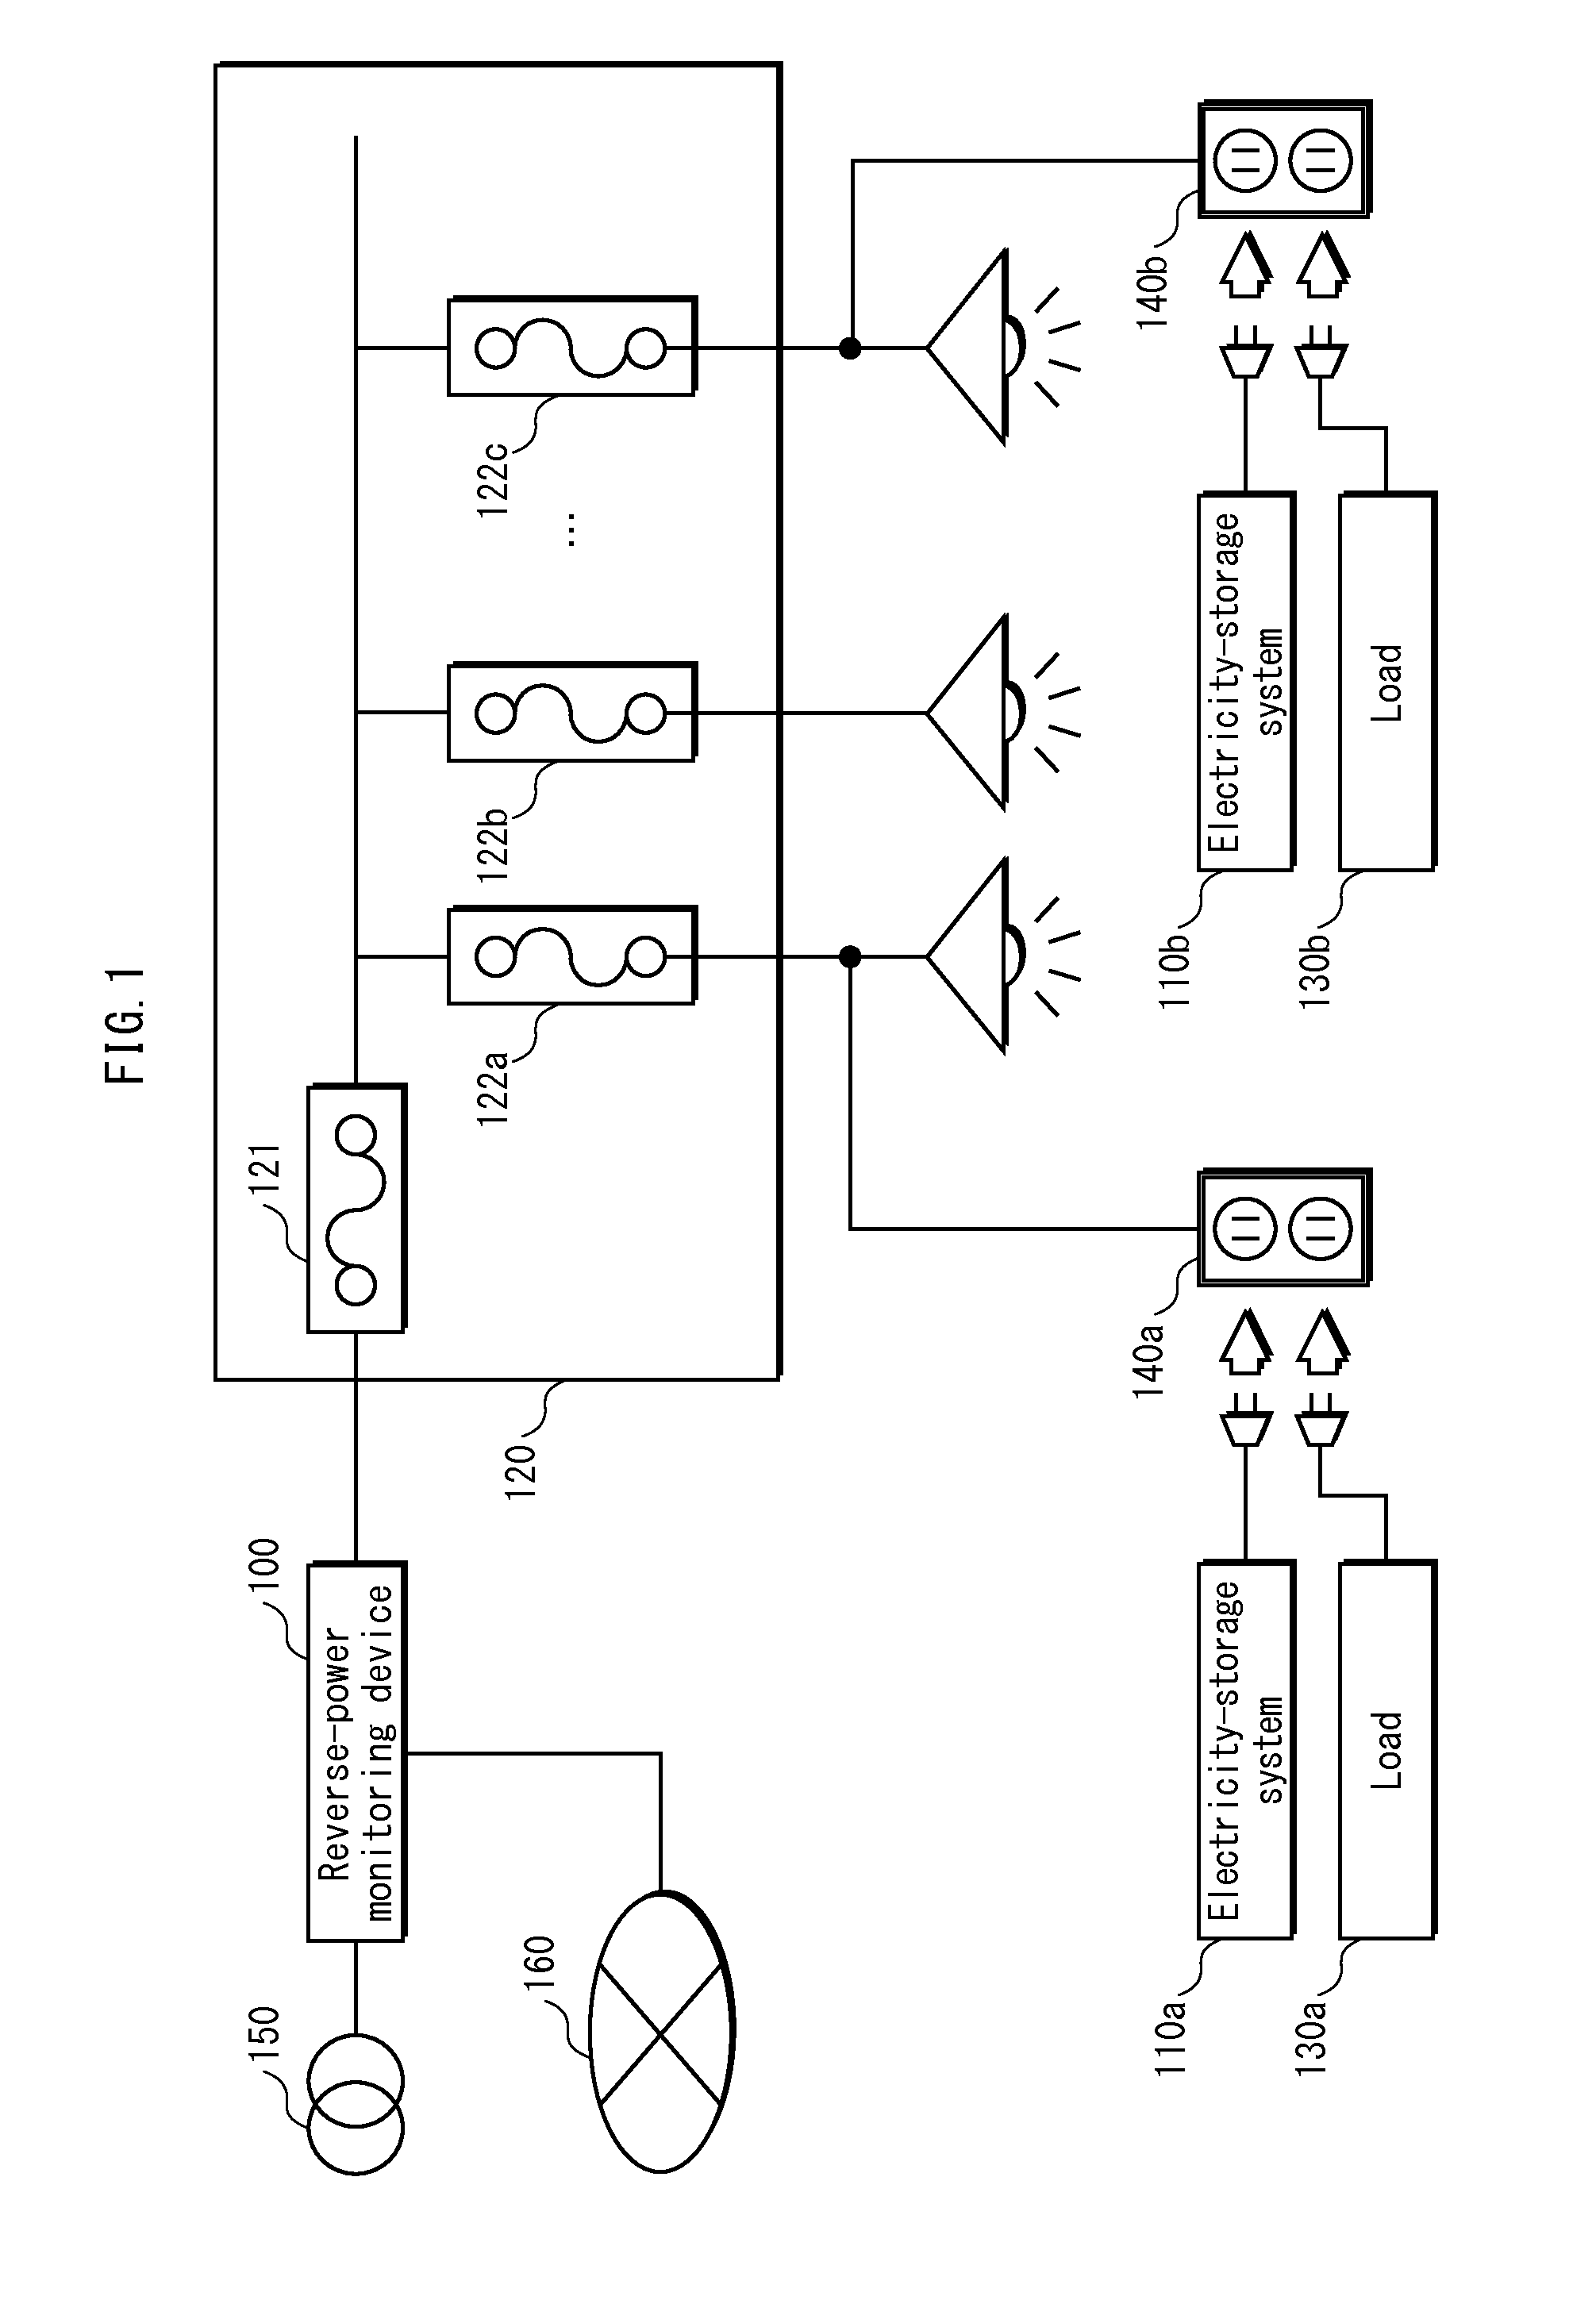 Electricity-storage system, monitoring device, and power control system